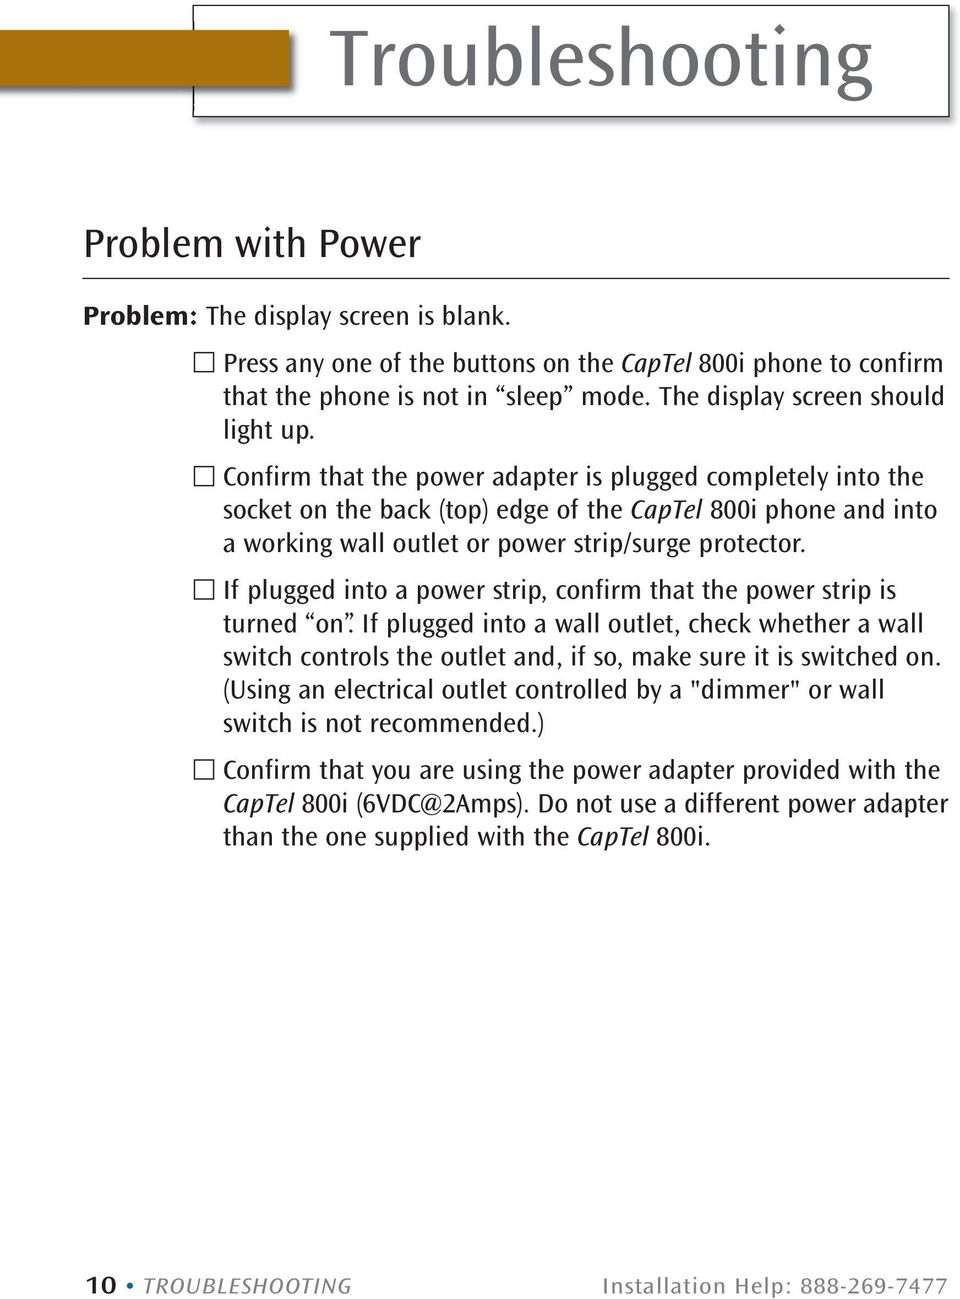 Confirm that the power adapter is plugged completely into the socket on the back (top) edge of the CapTel 800i phone and into a working wall outlet or power strip/surge protector.